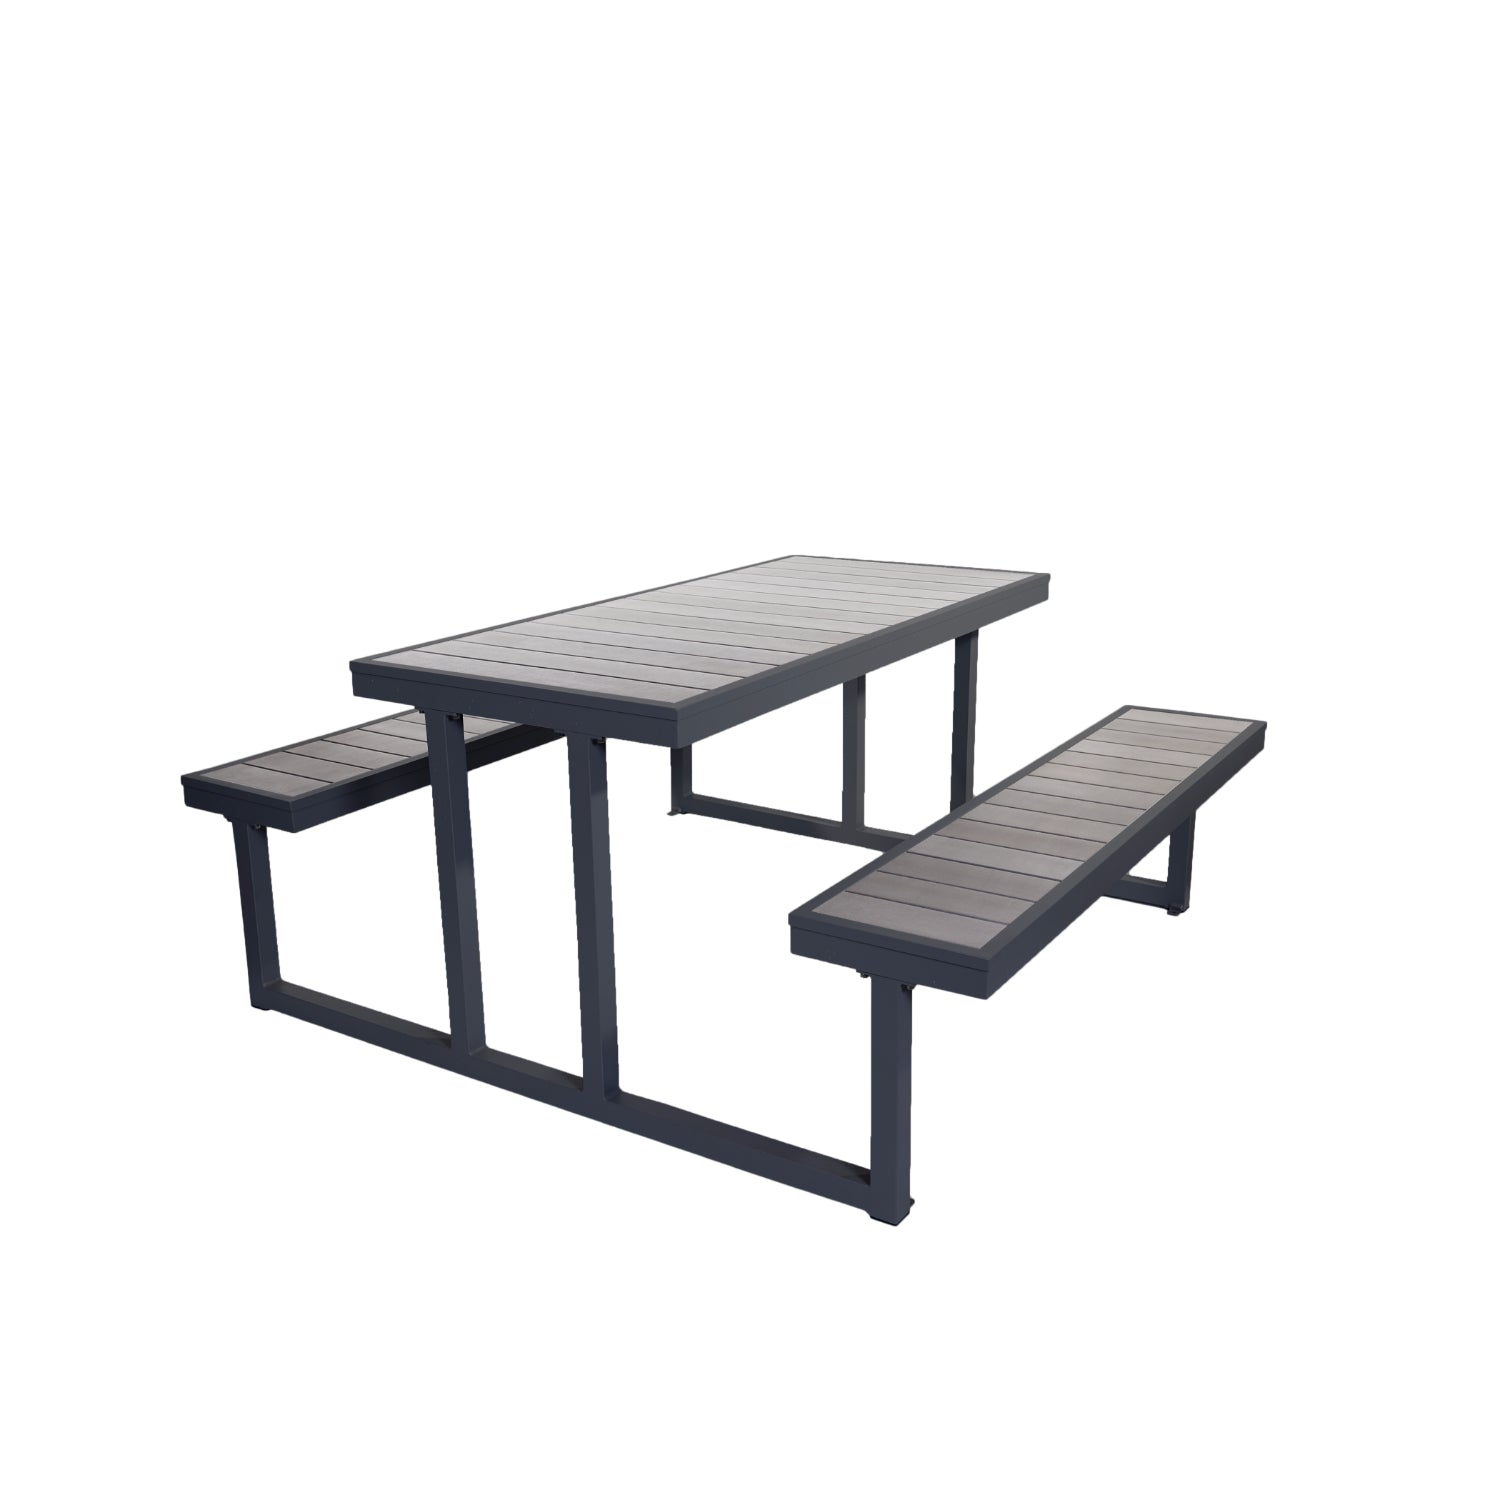 Seaside Collection Outdoor/Indoor 72" x 27.5" Picnic Table, Aluminum Frame with Gray Synthetic Teak Top